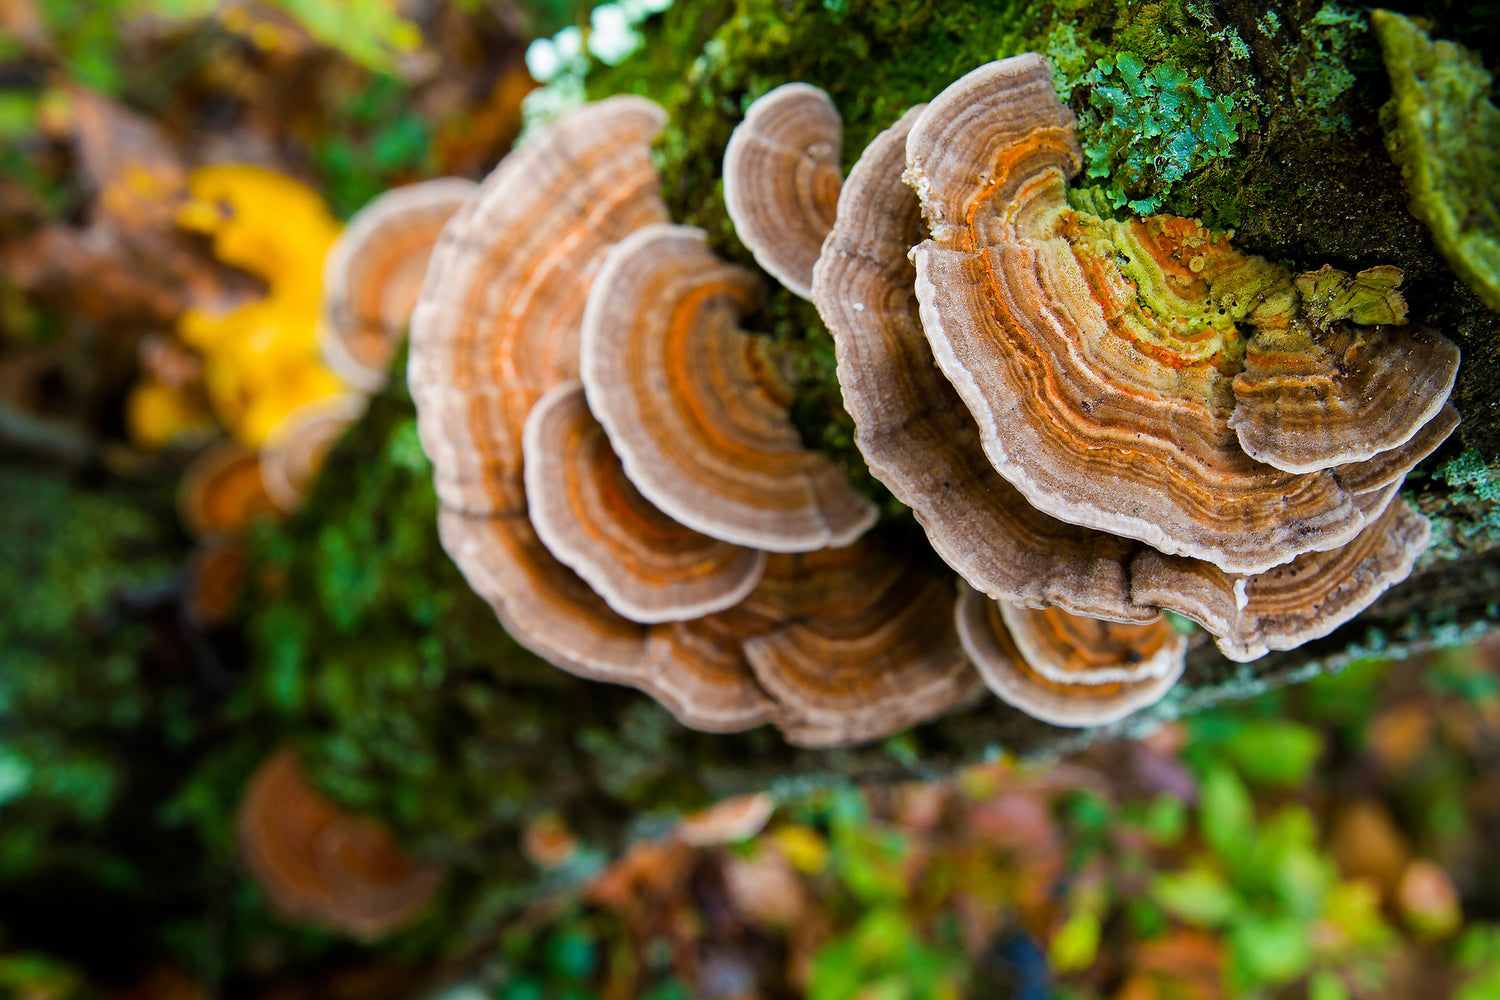 Turkey Tail mushrooms grow on a tree in a forest